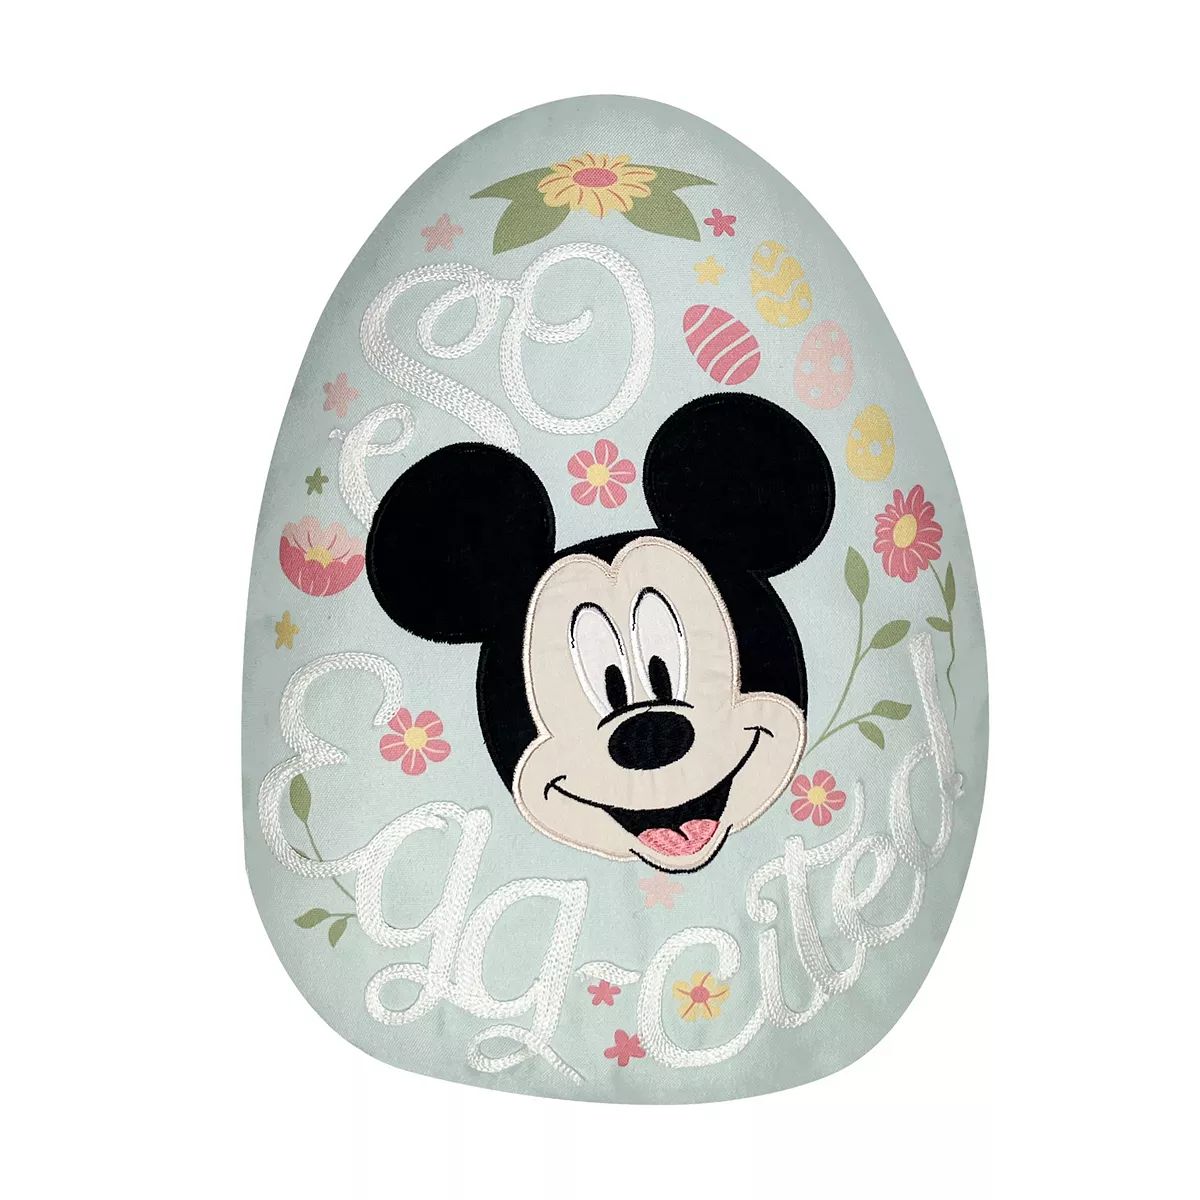 Celebrate Together™ Easter Disney's So Eggcited Mickey Throw Pillow | Kohl's